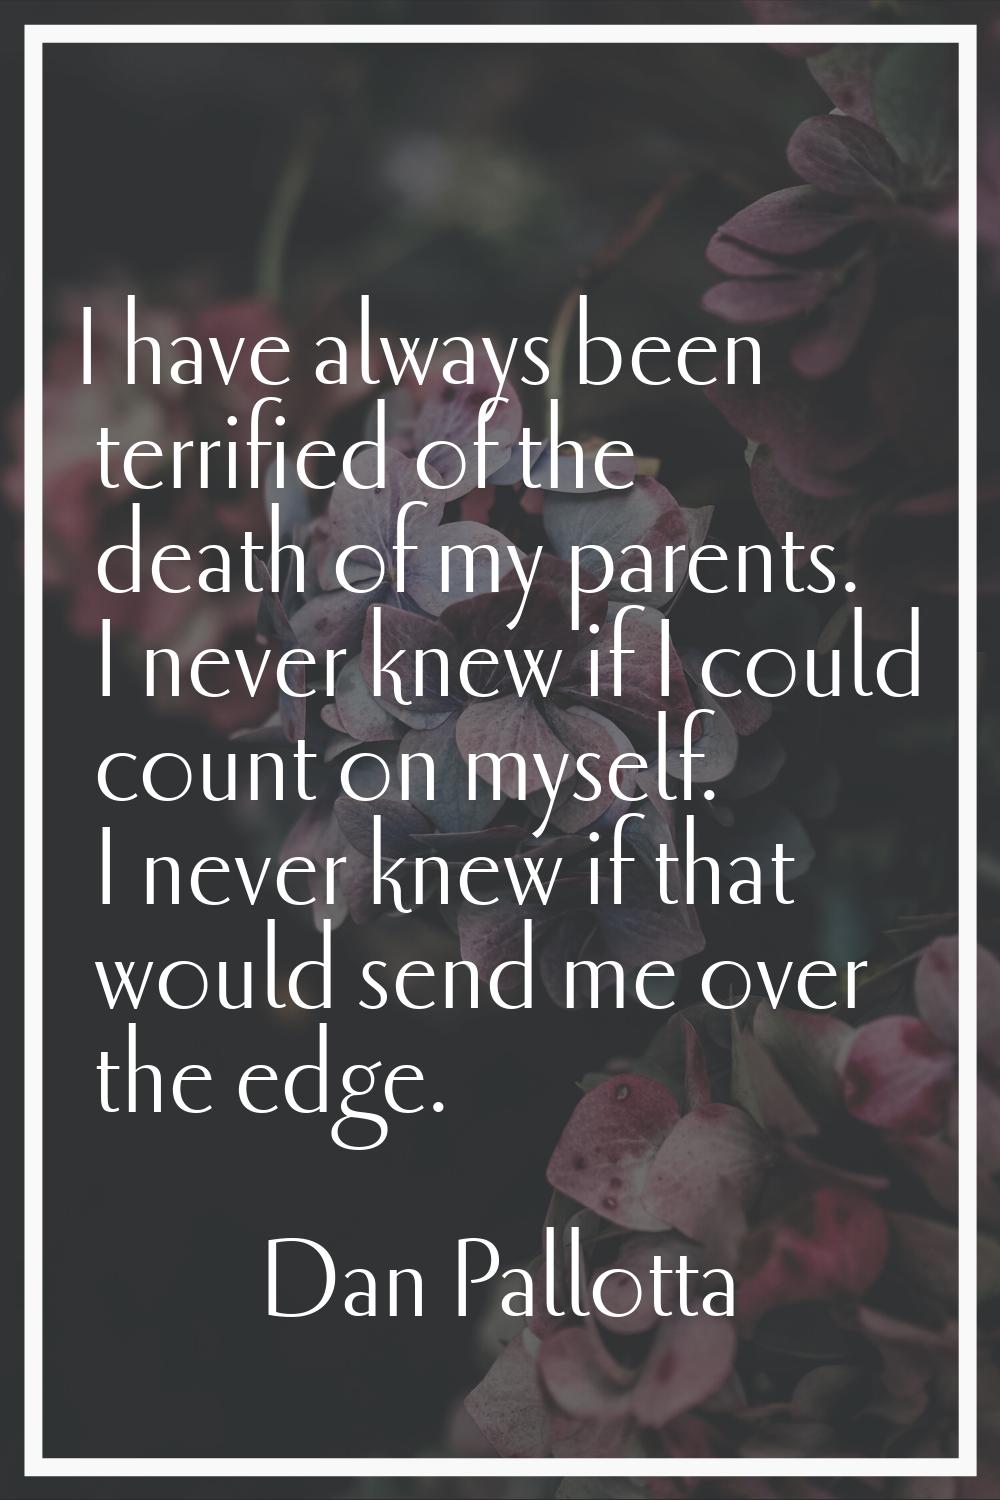 I have always been terrified of the death of my parents. I never knew if I could count on myself. I